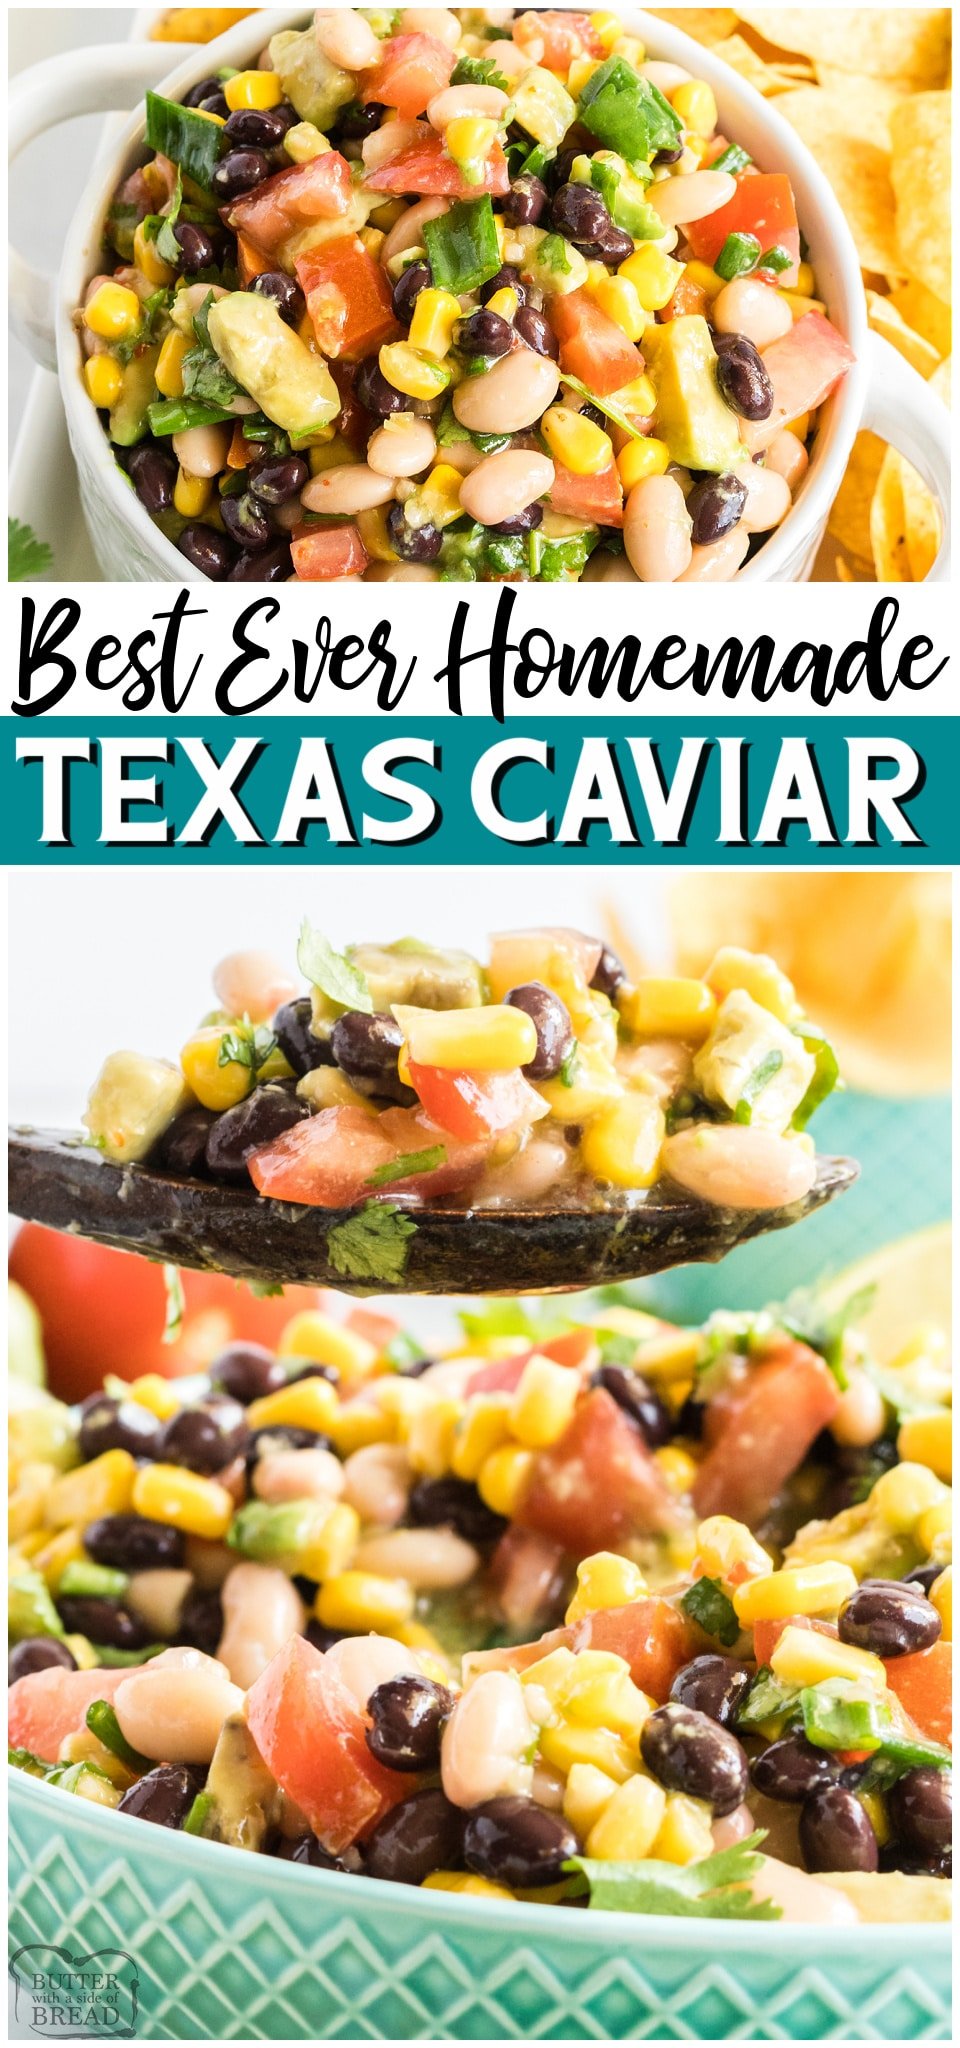 Best Texas Caviar recipe packed with fresh flavors like sweet corn, cilantro, tomato & avocado. Easy Texas Caviar Bean Dip is a popular savory appetizer perfect for game day! #gameday #dip #beandip #appetizer #CowboyCaviar #TexasCaviar #easyrecipe from BUTTER WITH A SIDE OF BREAD